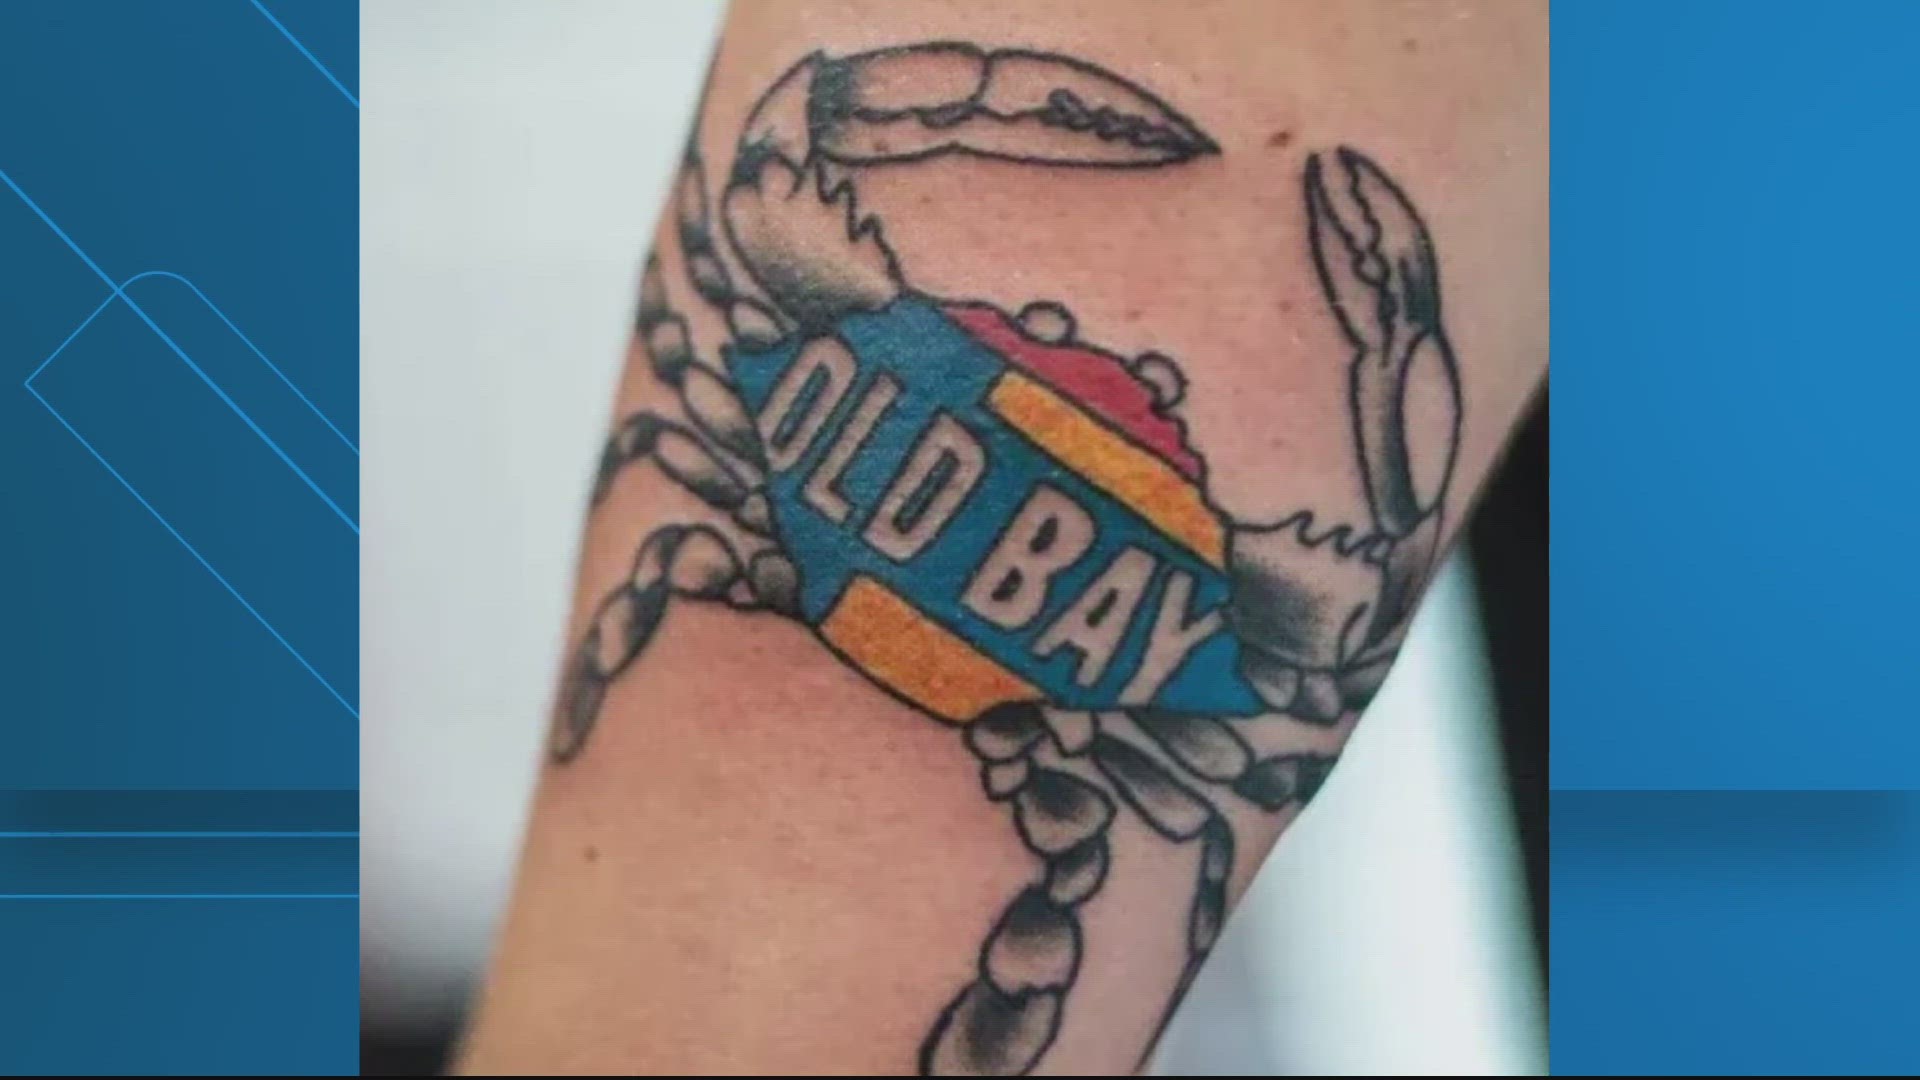 How much do you love Old Bay? Enough to make it permanent? If so, we have the perfect event for you.